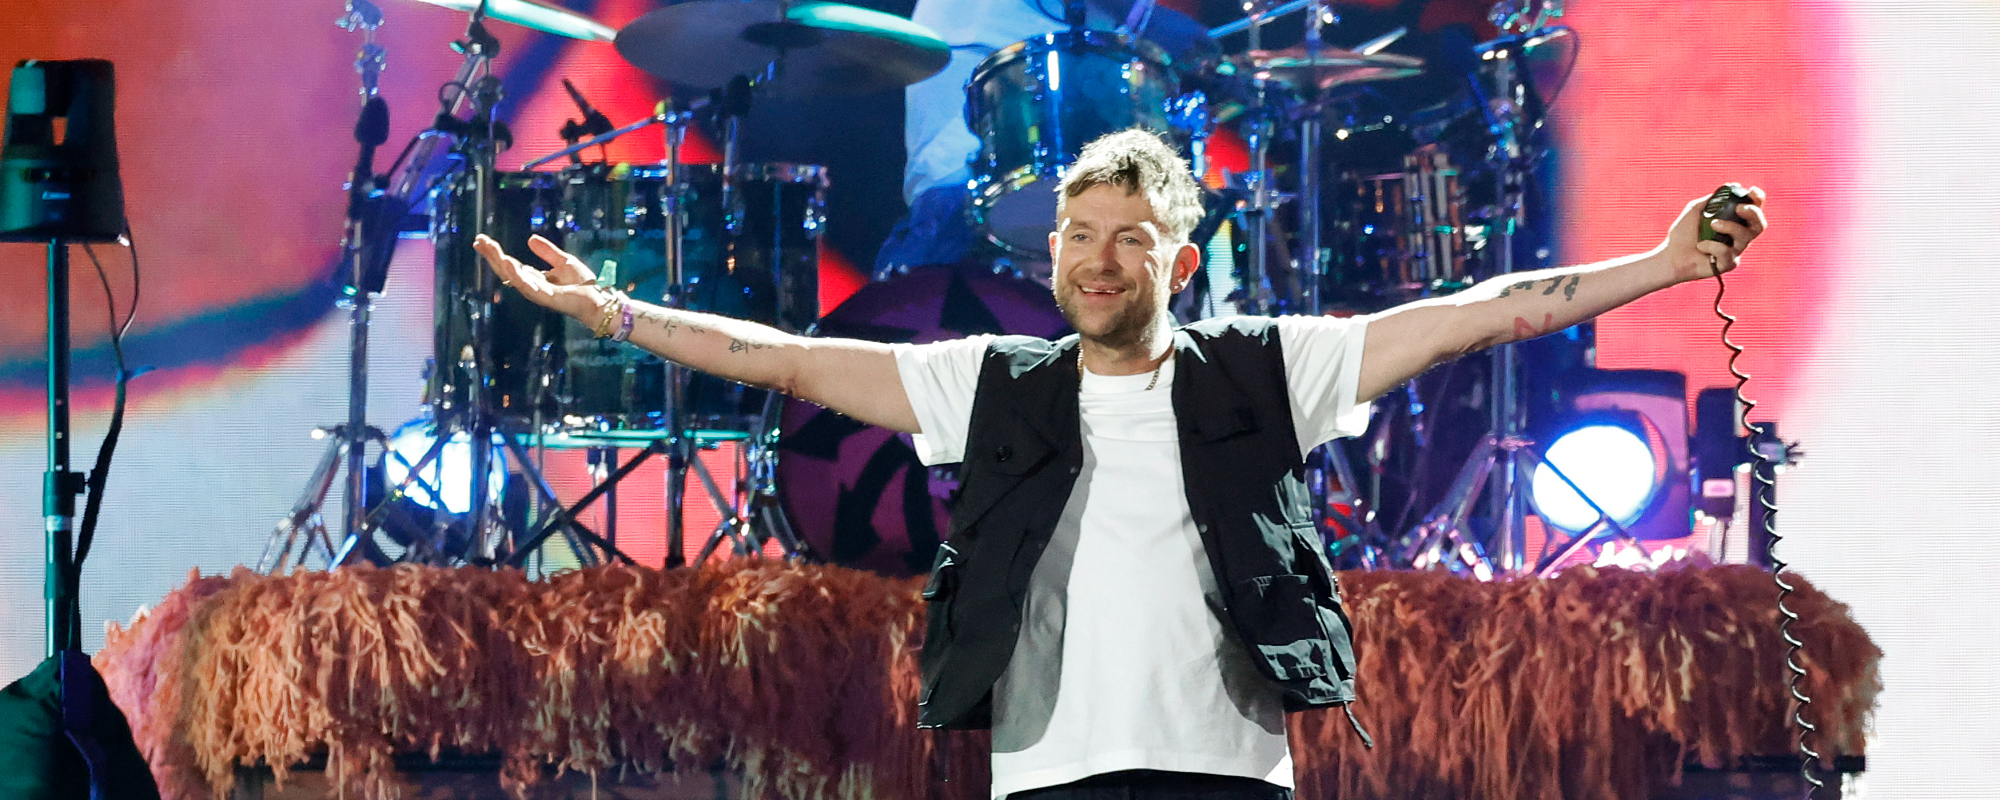 Damon Albarn Spills the Tea: Not Happy with Rolling Stones and Their Hackney “Contribution”